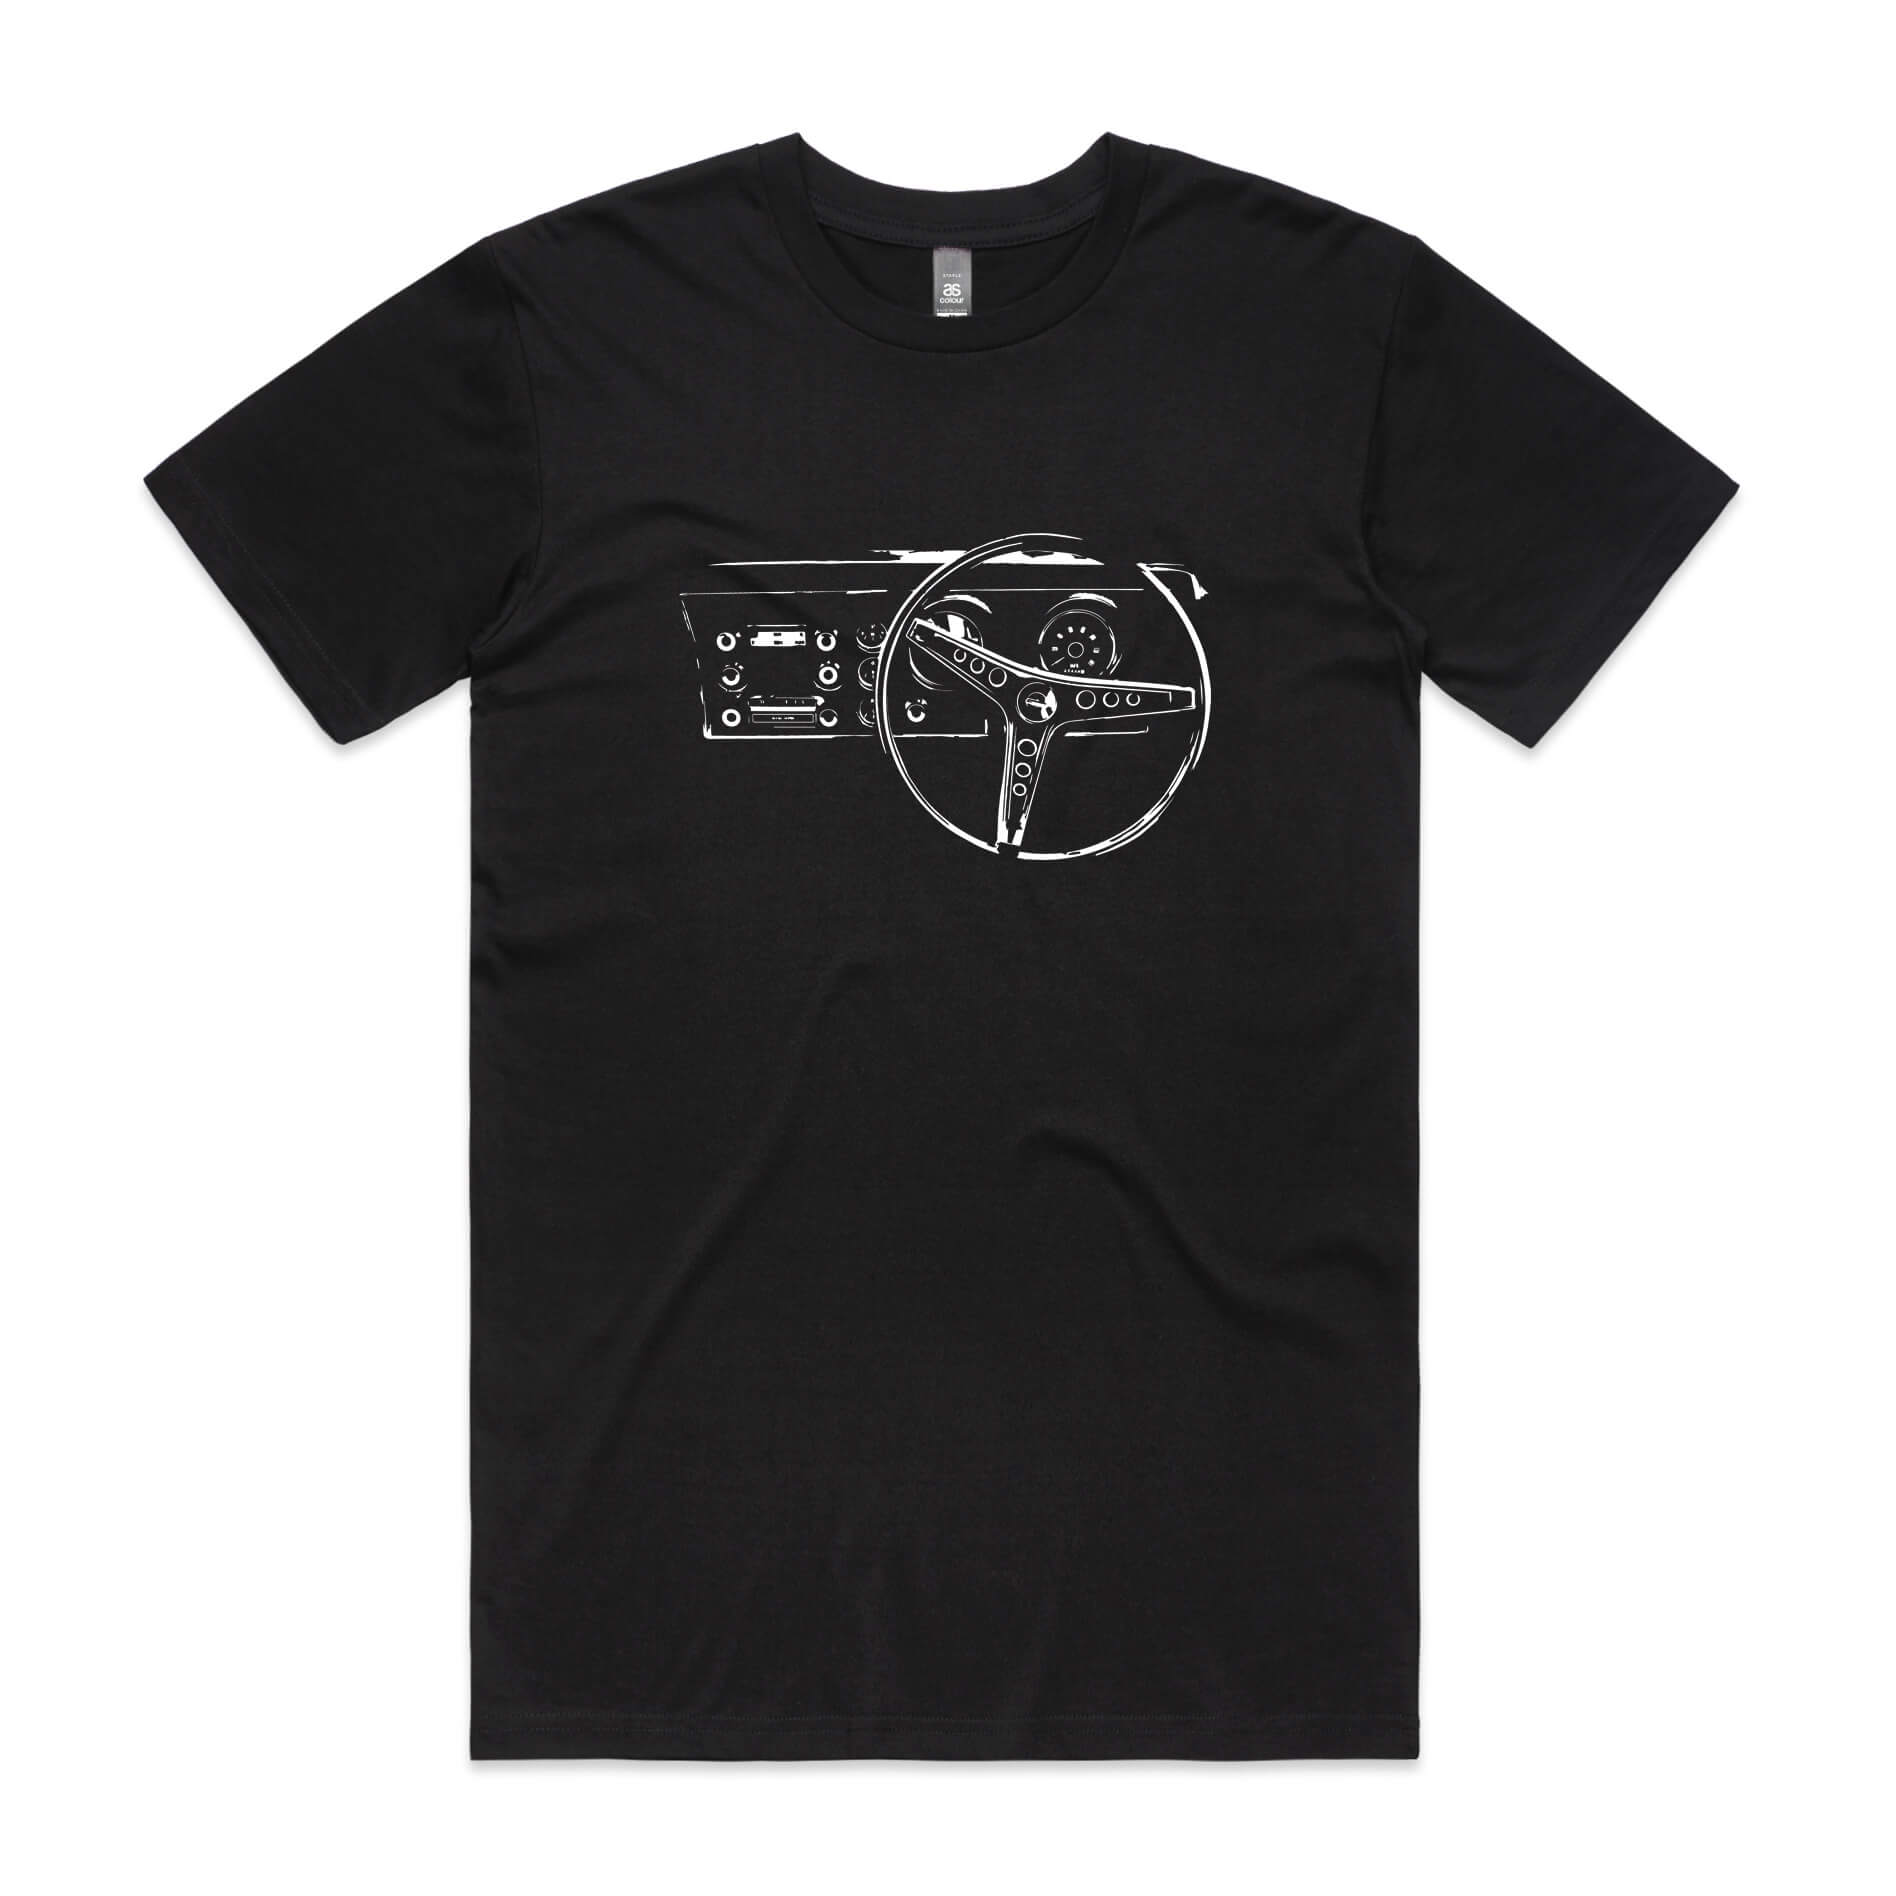 Falcon dash t-shirt in black with a Ford XY Falcon dashboard printed on the front